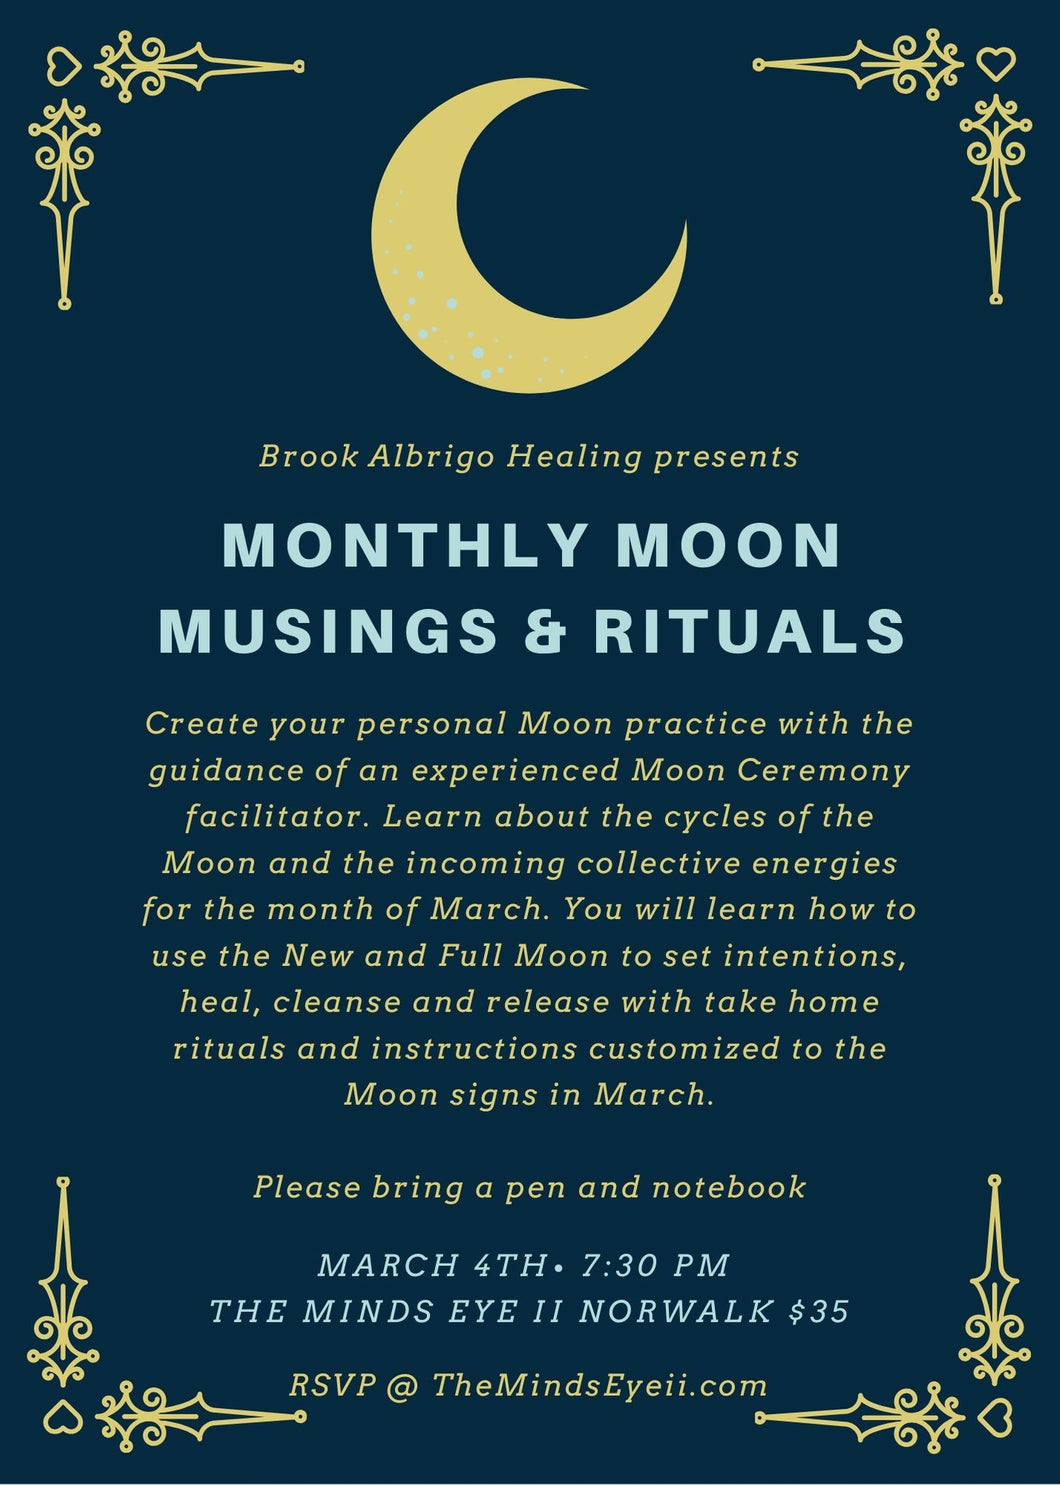 Monthly Moon Musings & Rituals